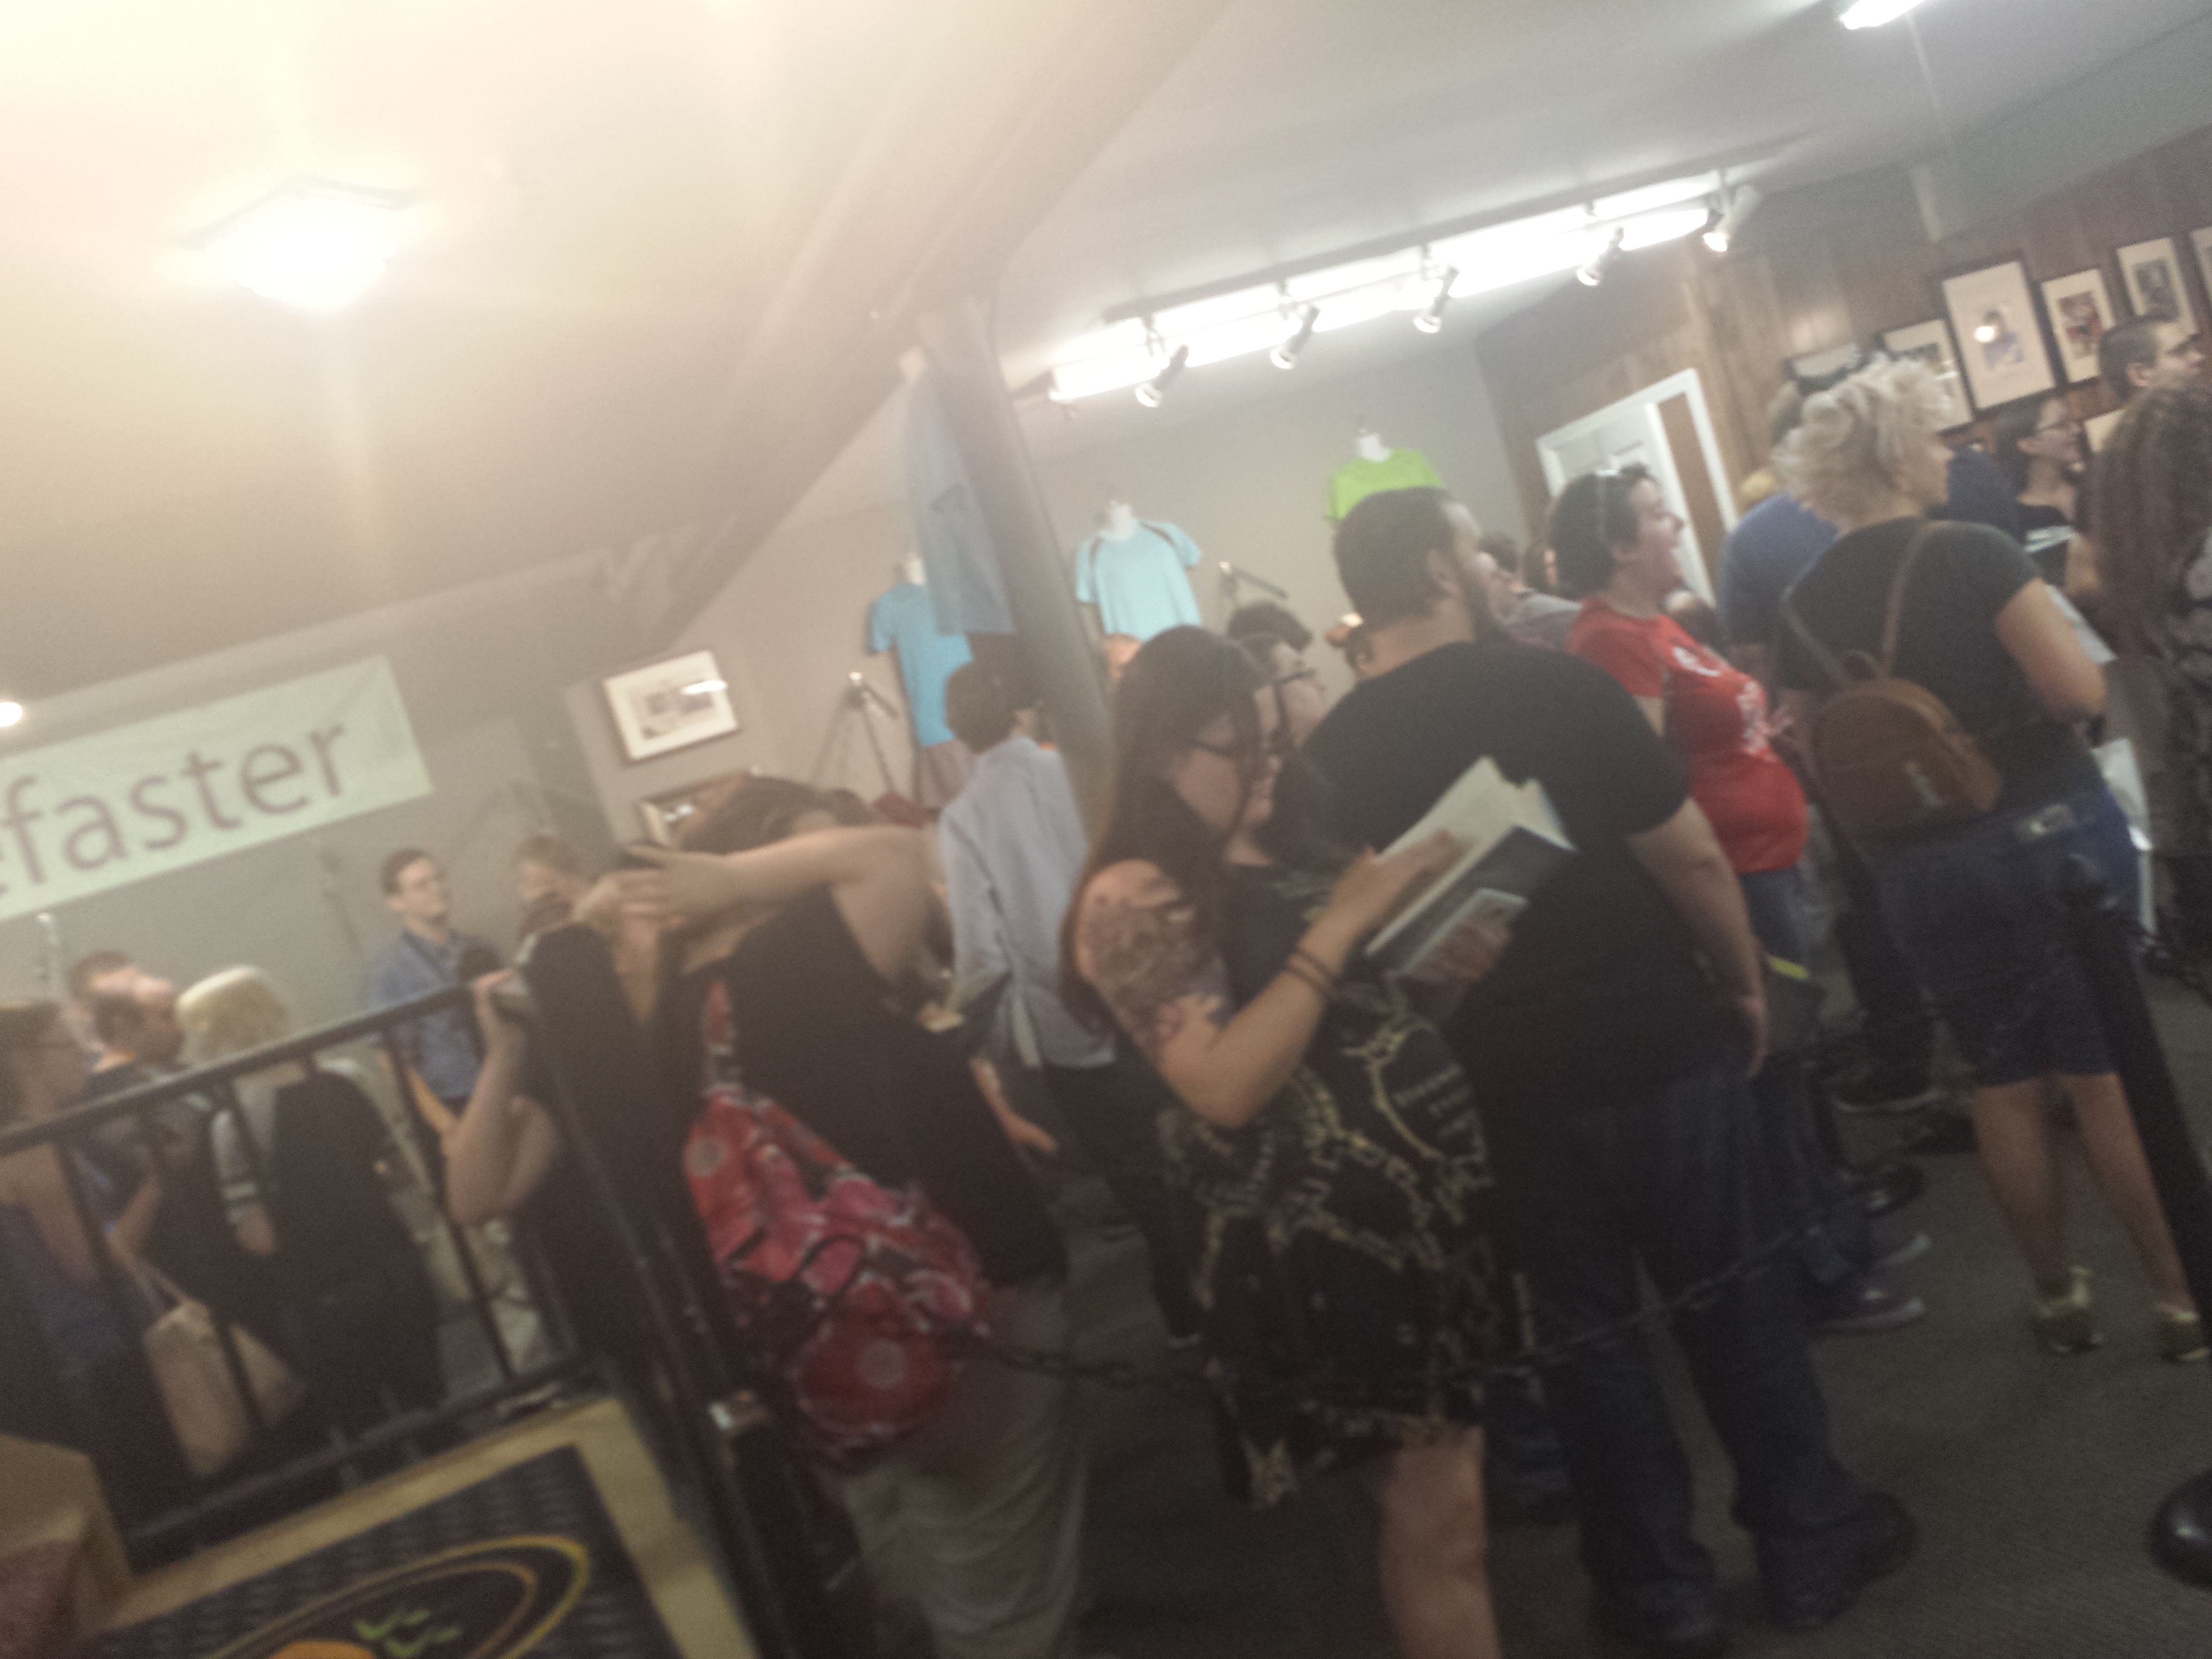 20150811_193531  felicia day book signing